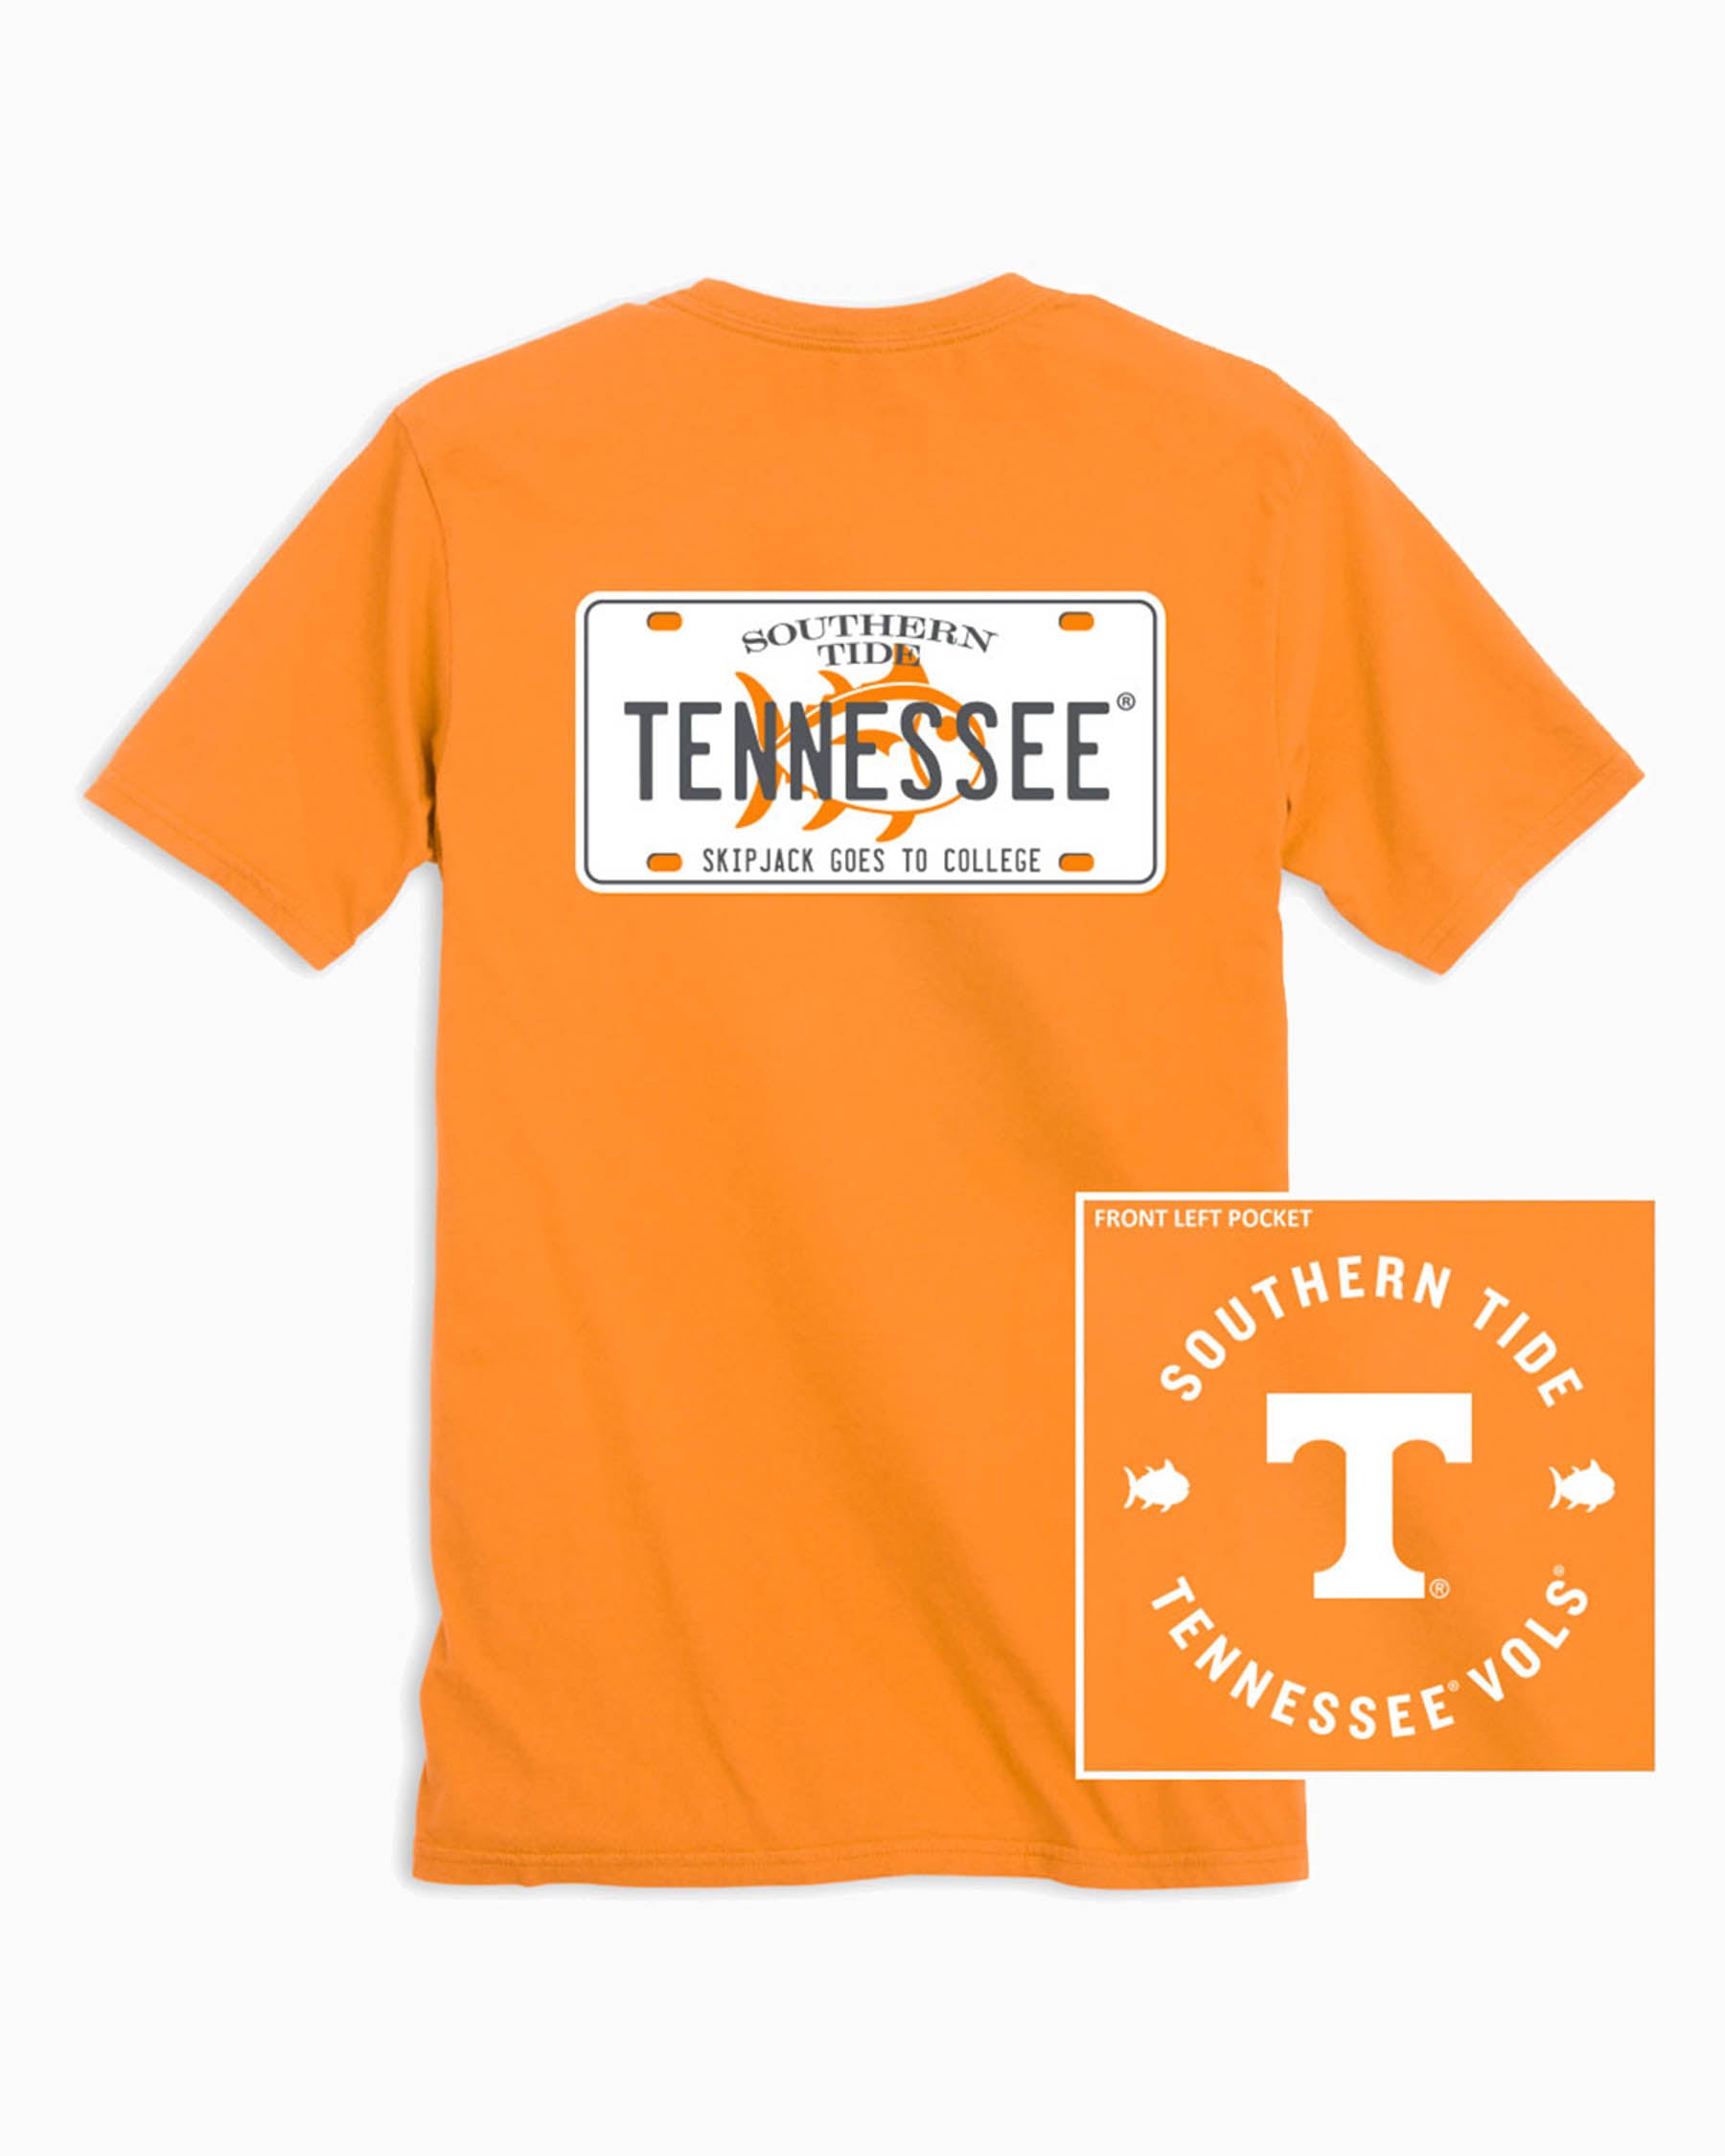 Personalized UT Football Jerseys Available for Order at Rocky's